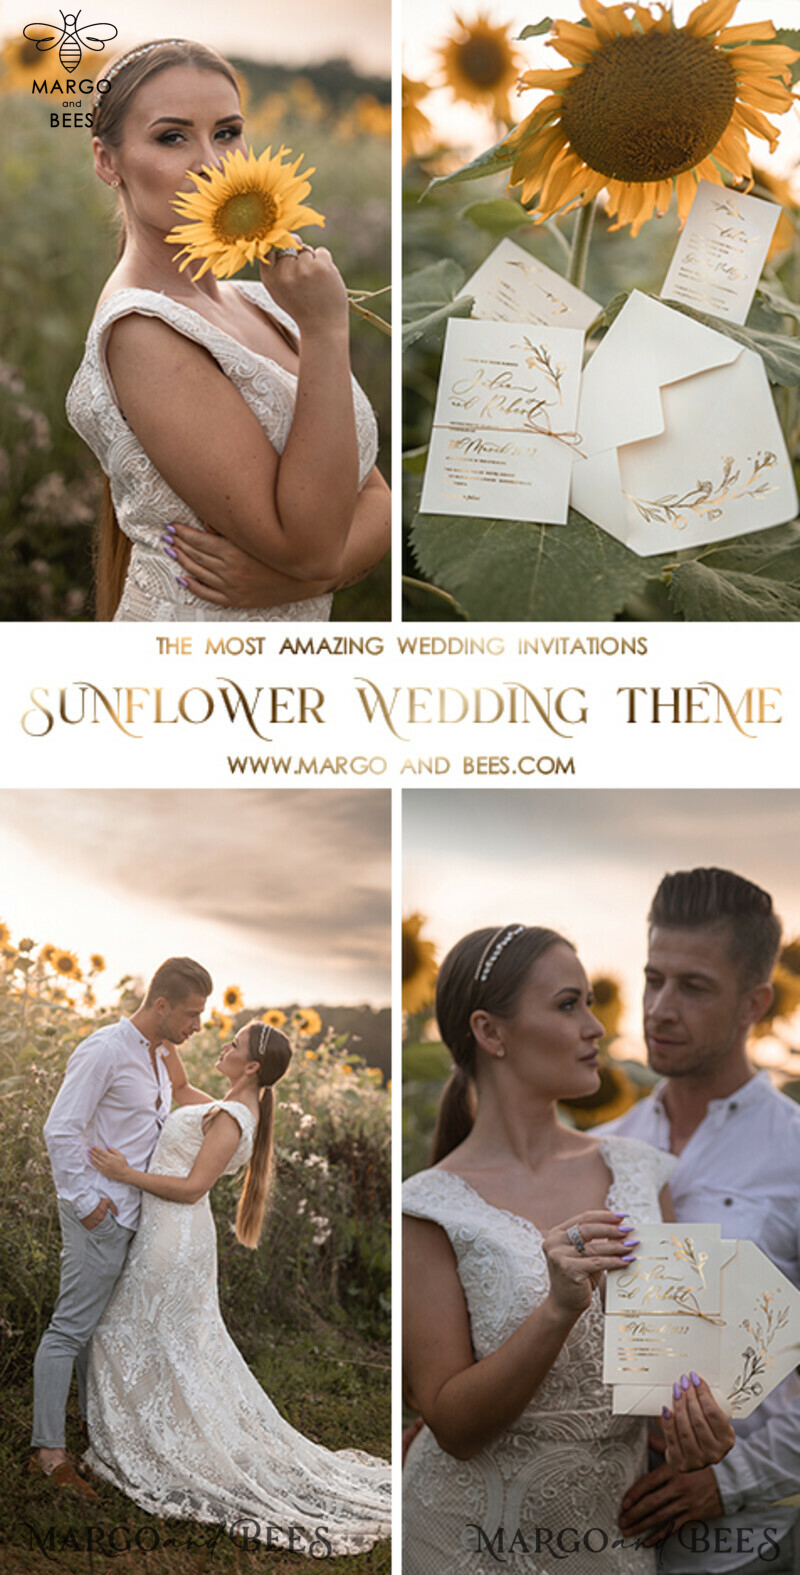 Exquisite and Personalized: Elegant Custom Wedding Cards with a Touch of Gold and Nude
Elevate your Wedding with Bespoke Glamour: Golden Nude Wedding Invitations for a Luxurious Celebration
Romantic Charm meets Simple Elegance: Customized Minimalistic Wedding Stationery that Sets the Tone-3